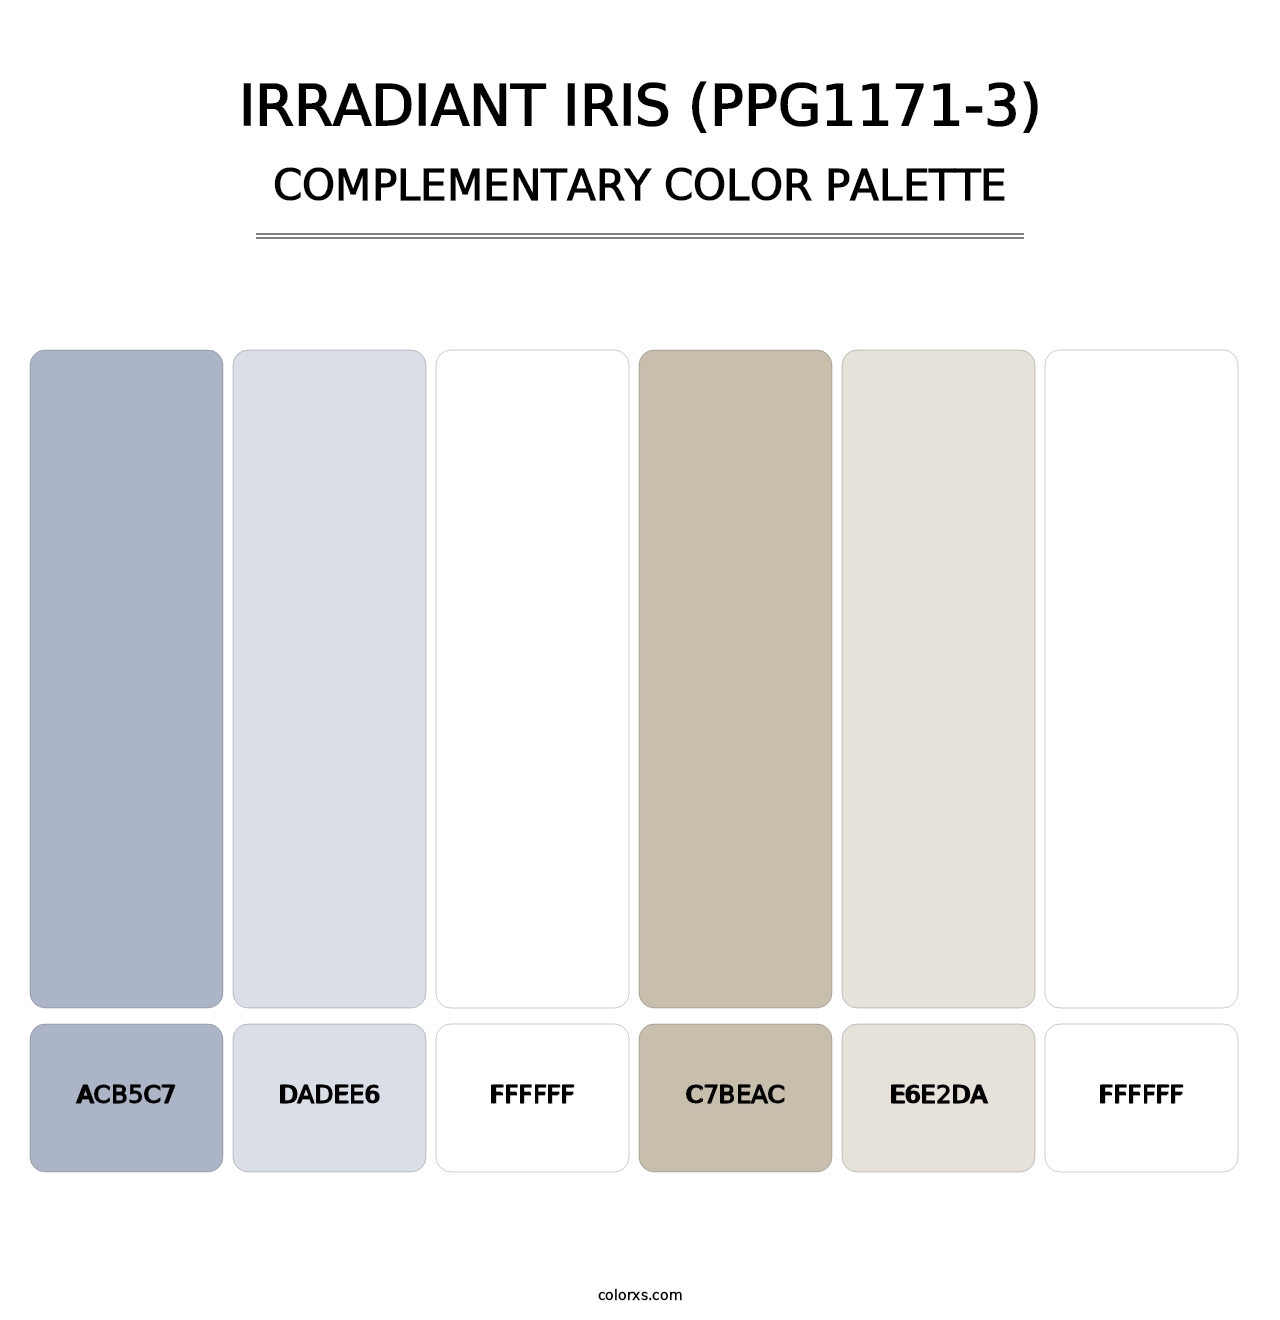 Irradiant Iris (PPG1171-3) - Complementary Color Palette